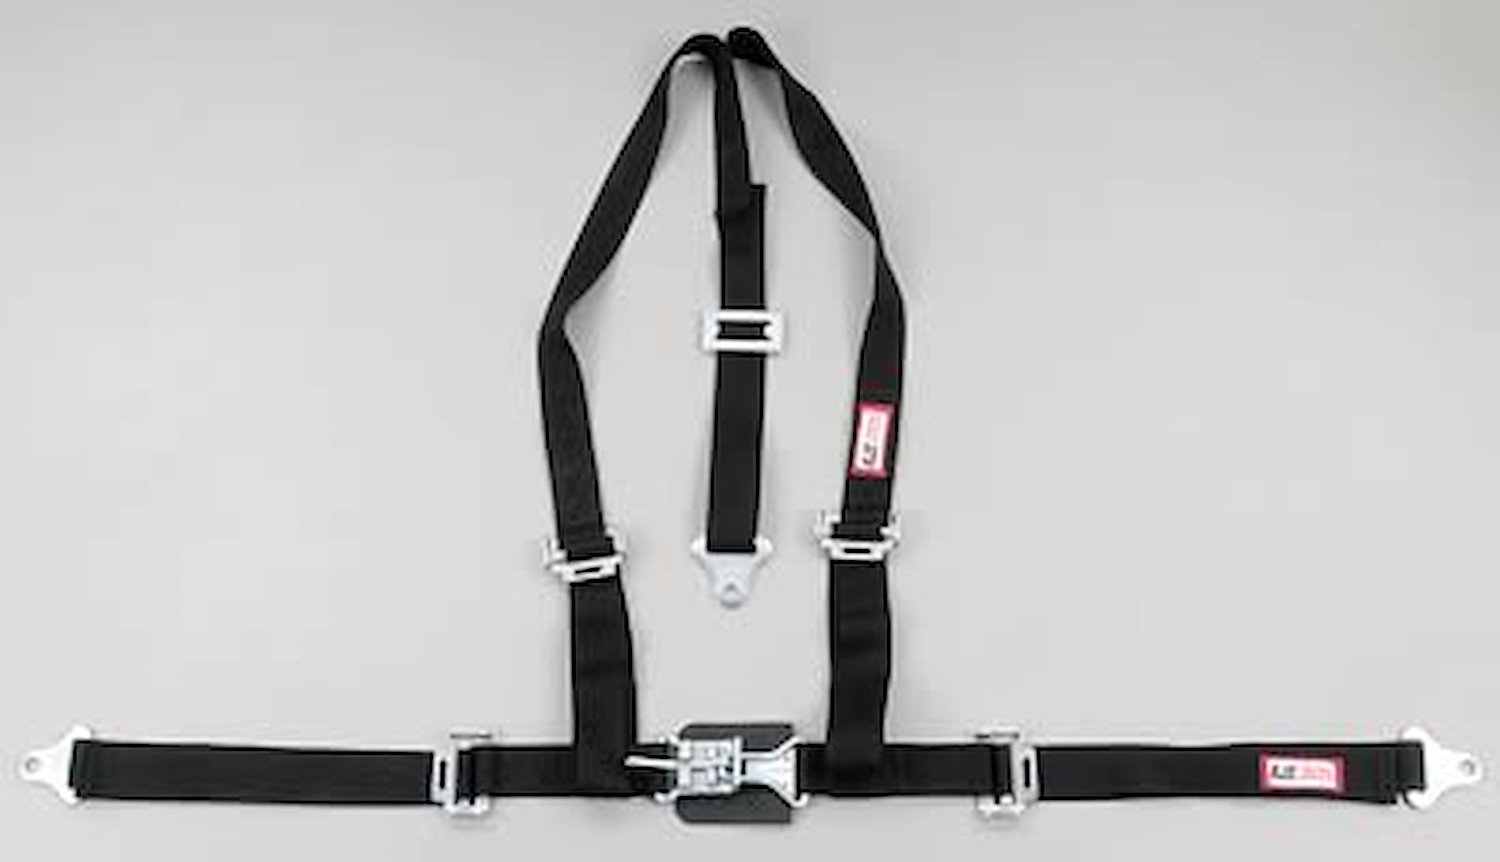 NON-SFI L&L HARNESS 2 PULL UP Lap Belt SEWN IN 2 S.H. V ROLL BAR Mount ALL WRAP ENDS RED